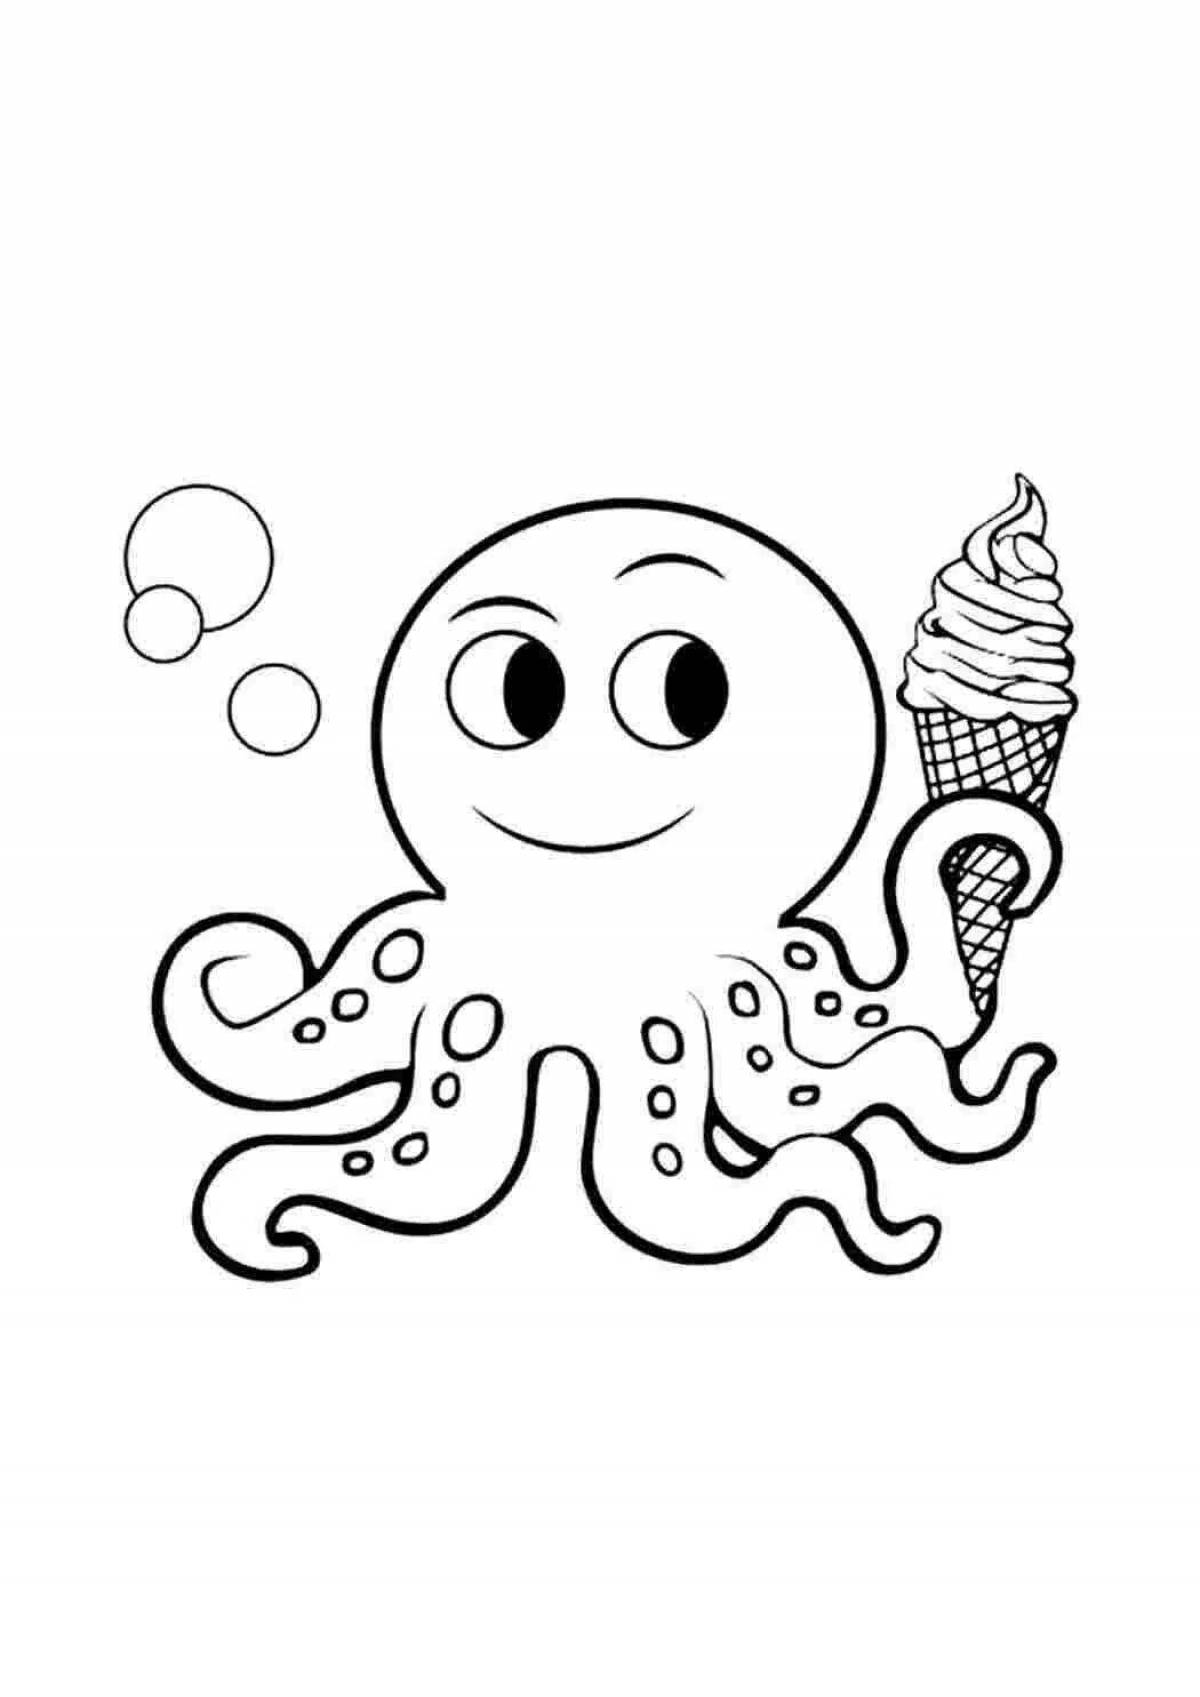 Adorable octopus coloring book for 3-4 year olds